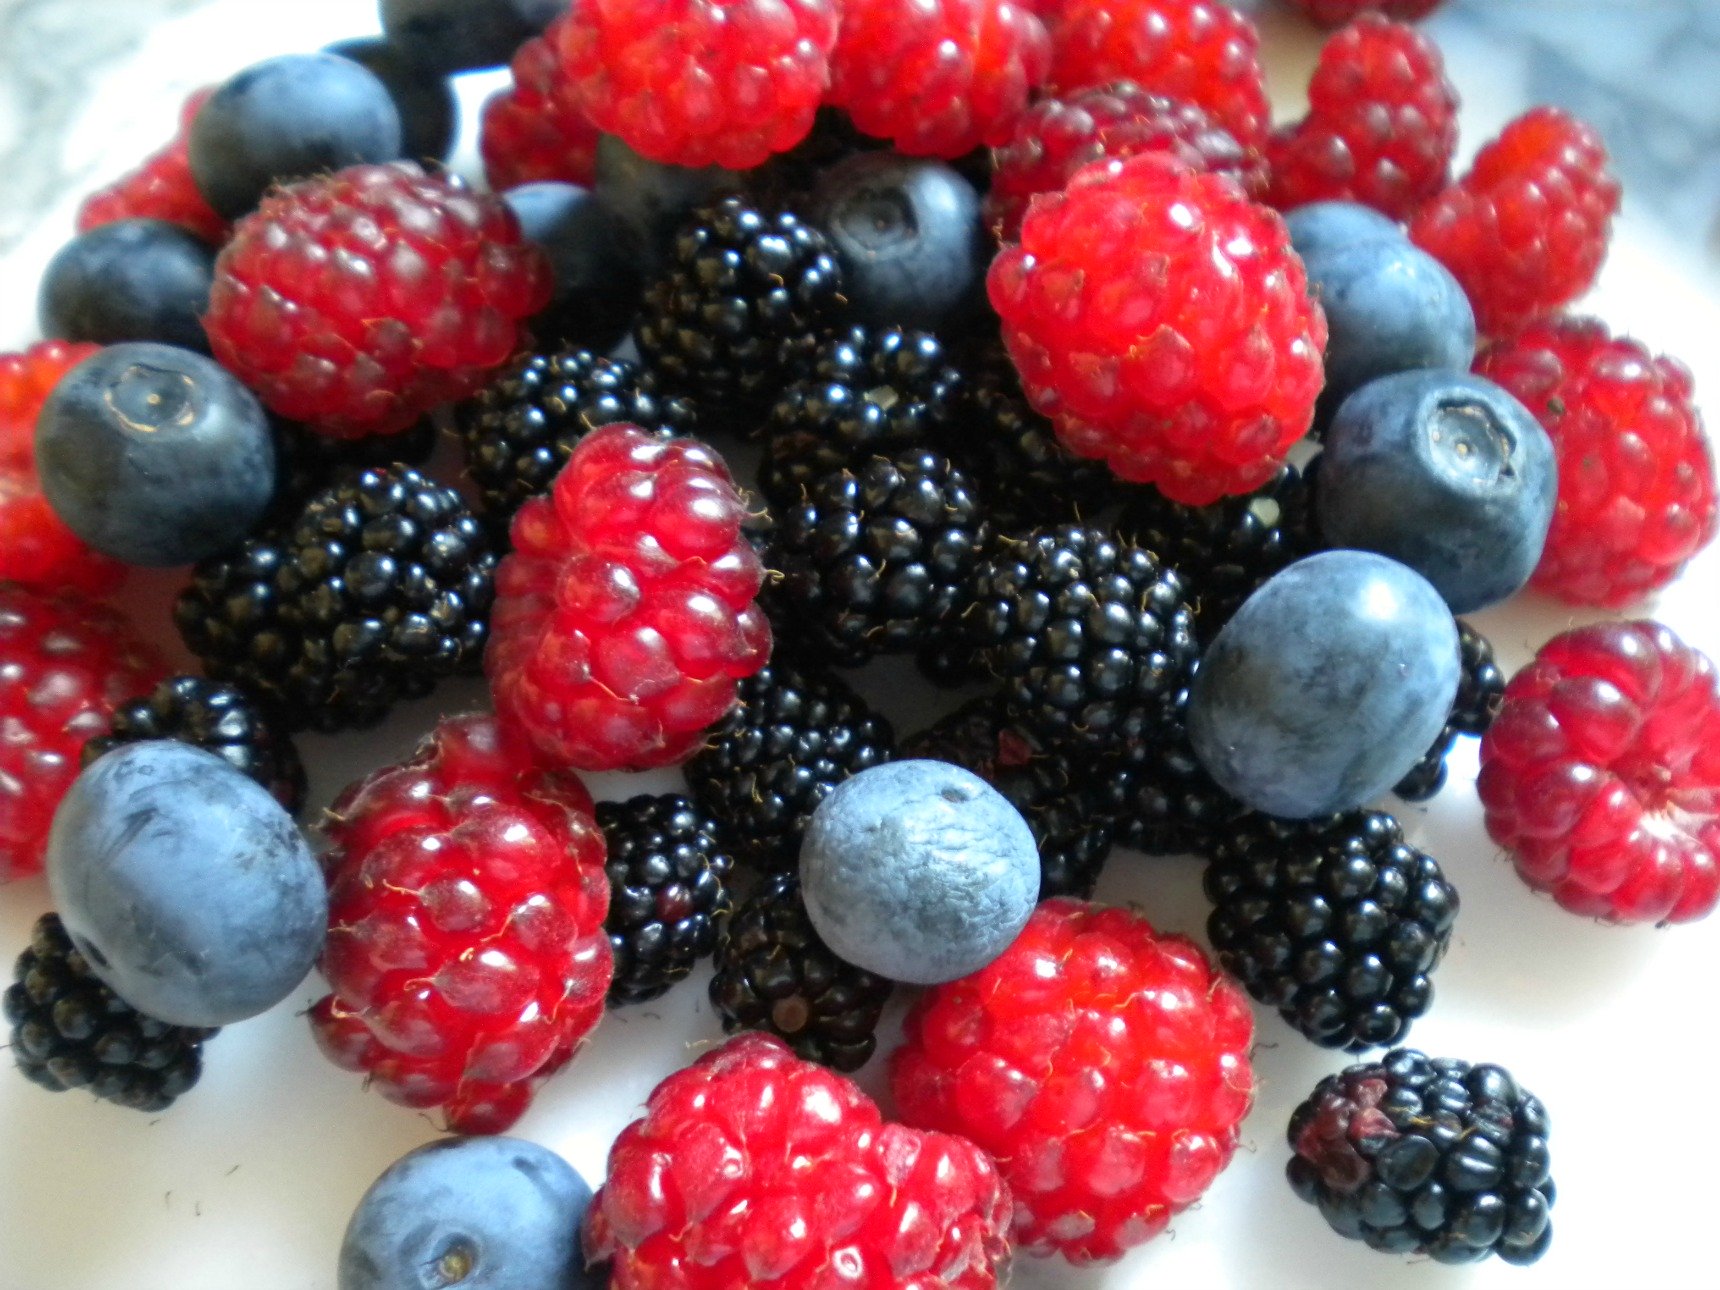 Antioxidant Berries - Which Berries Provide the Most Benefit to Our ...